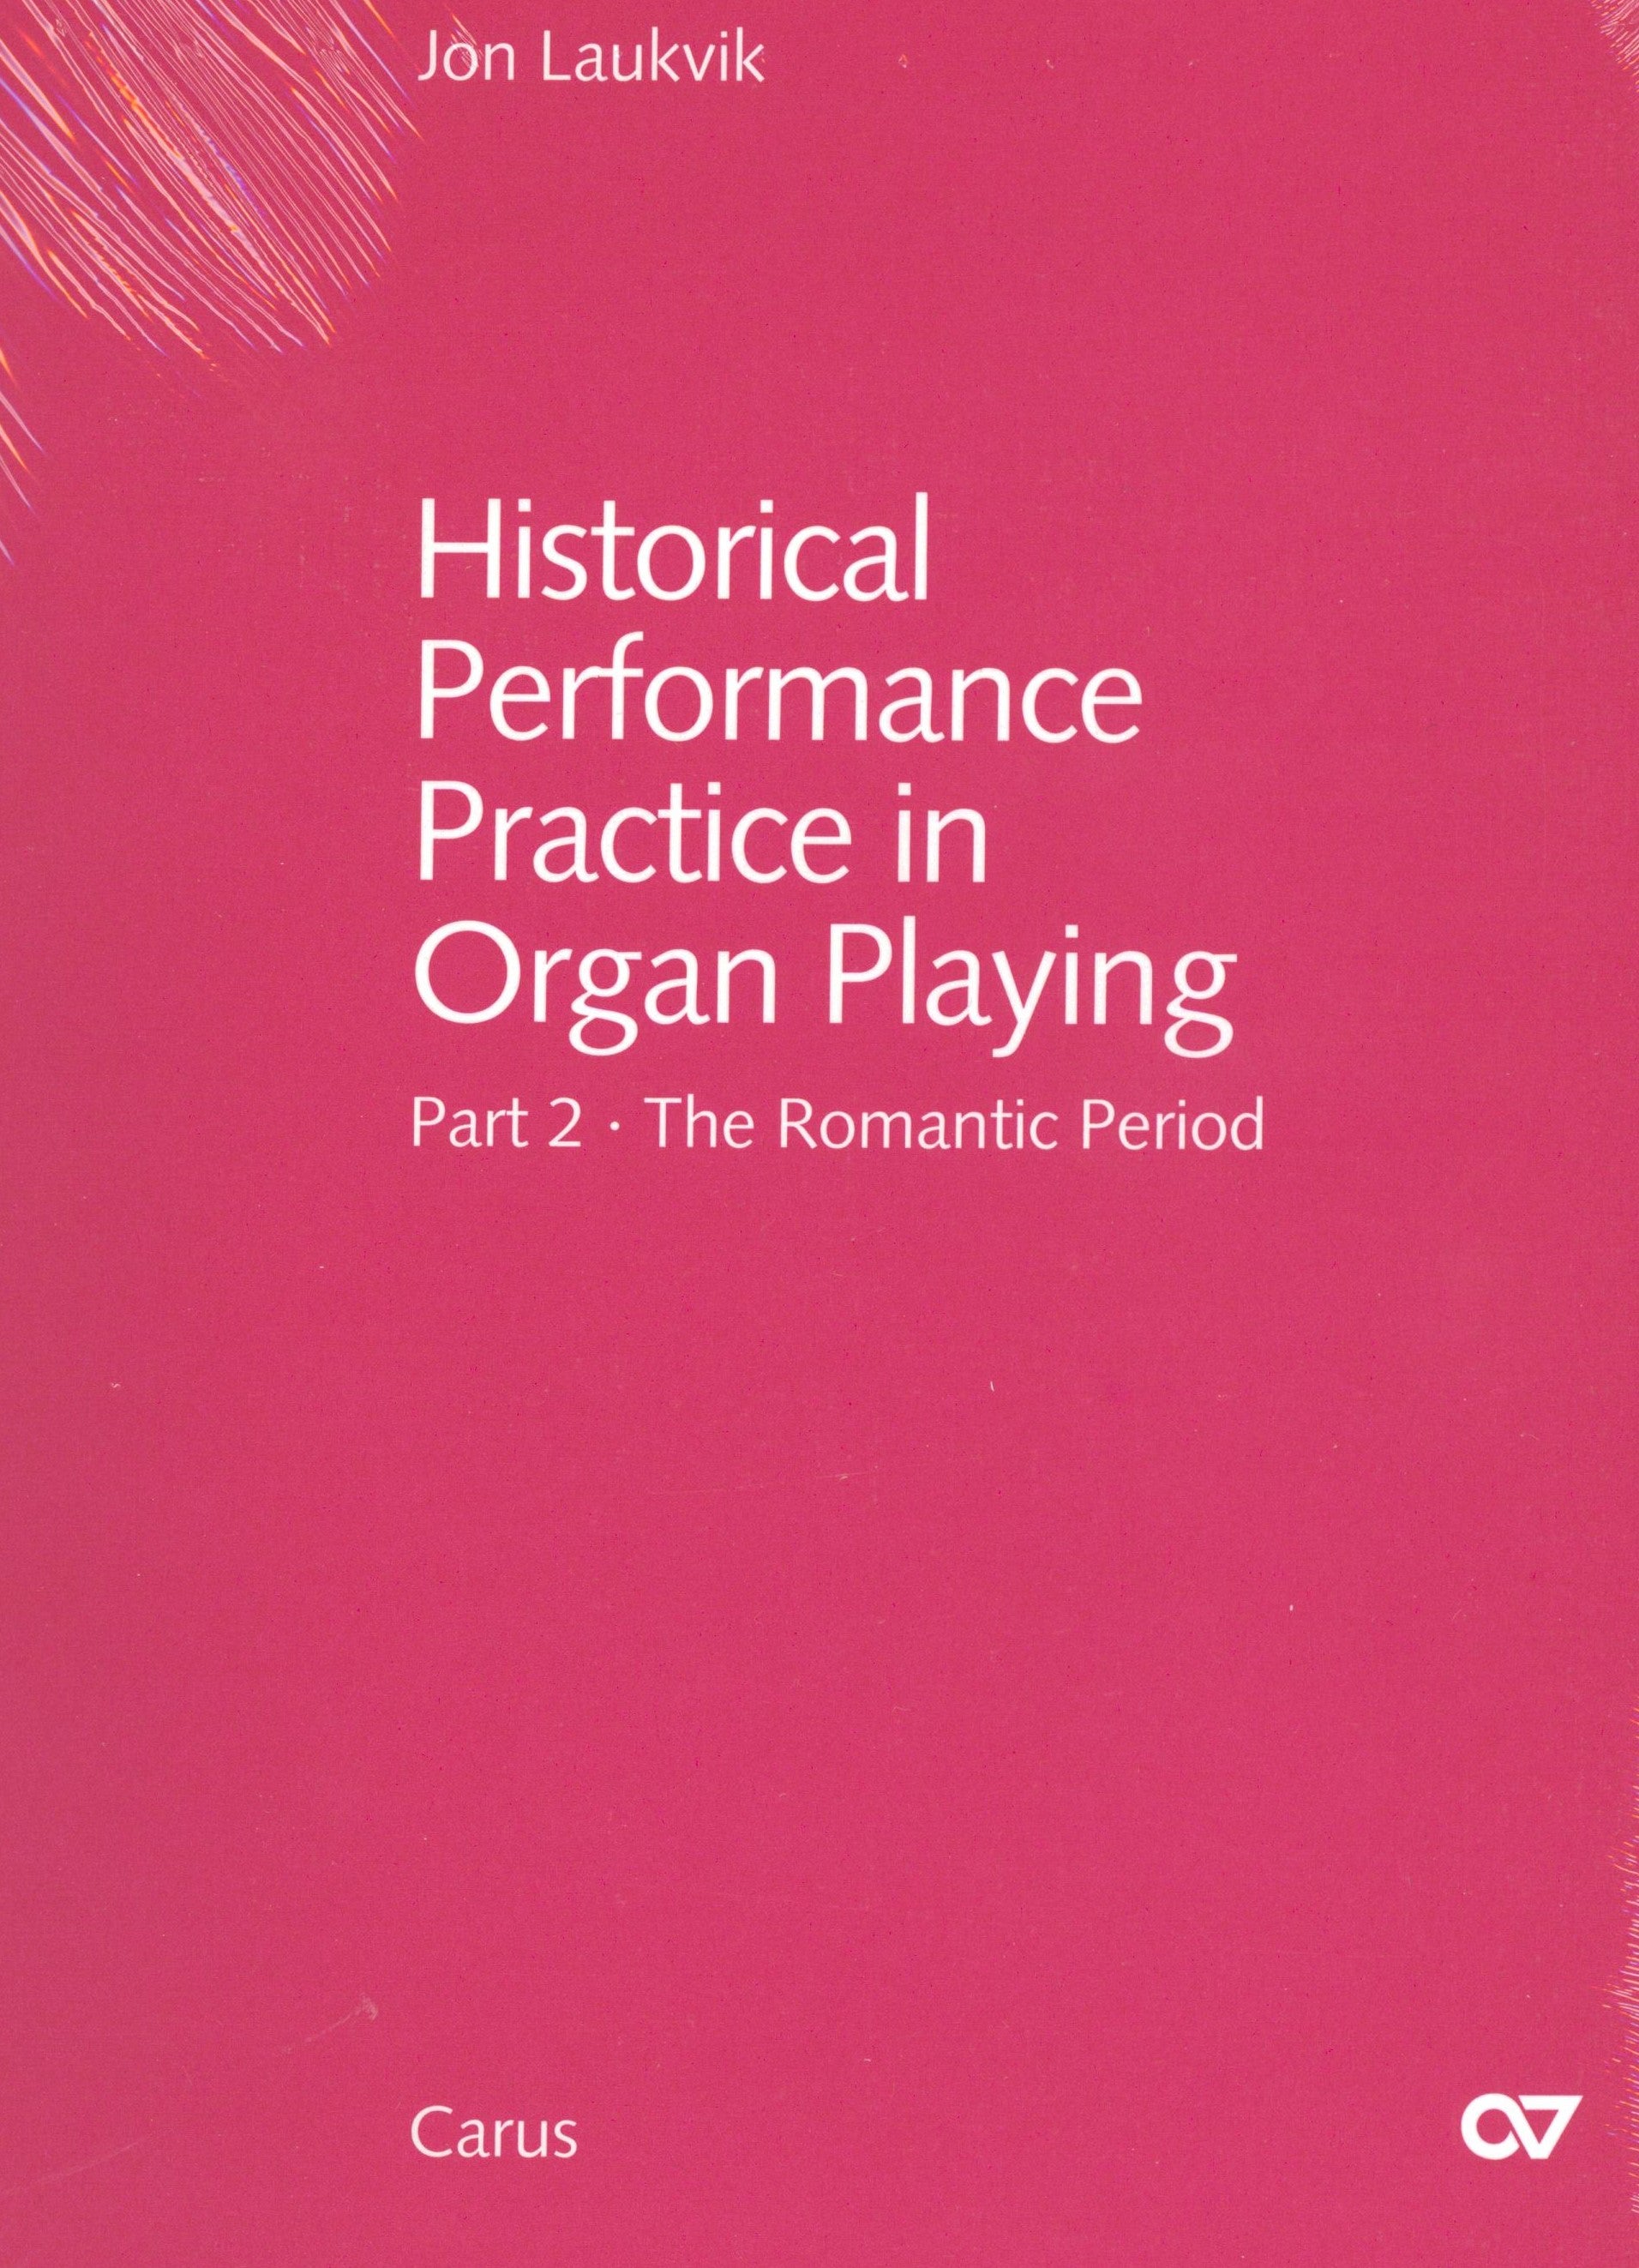 Historical Performance Practice in Organ Playing - Part 2: The Romantic Period